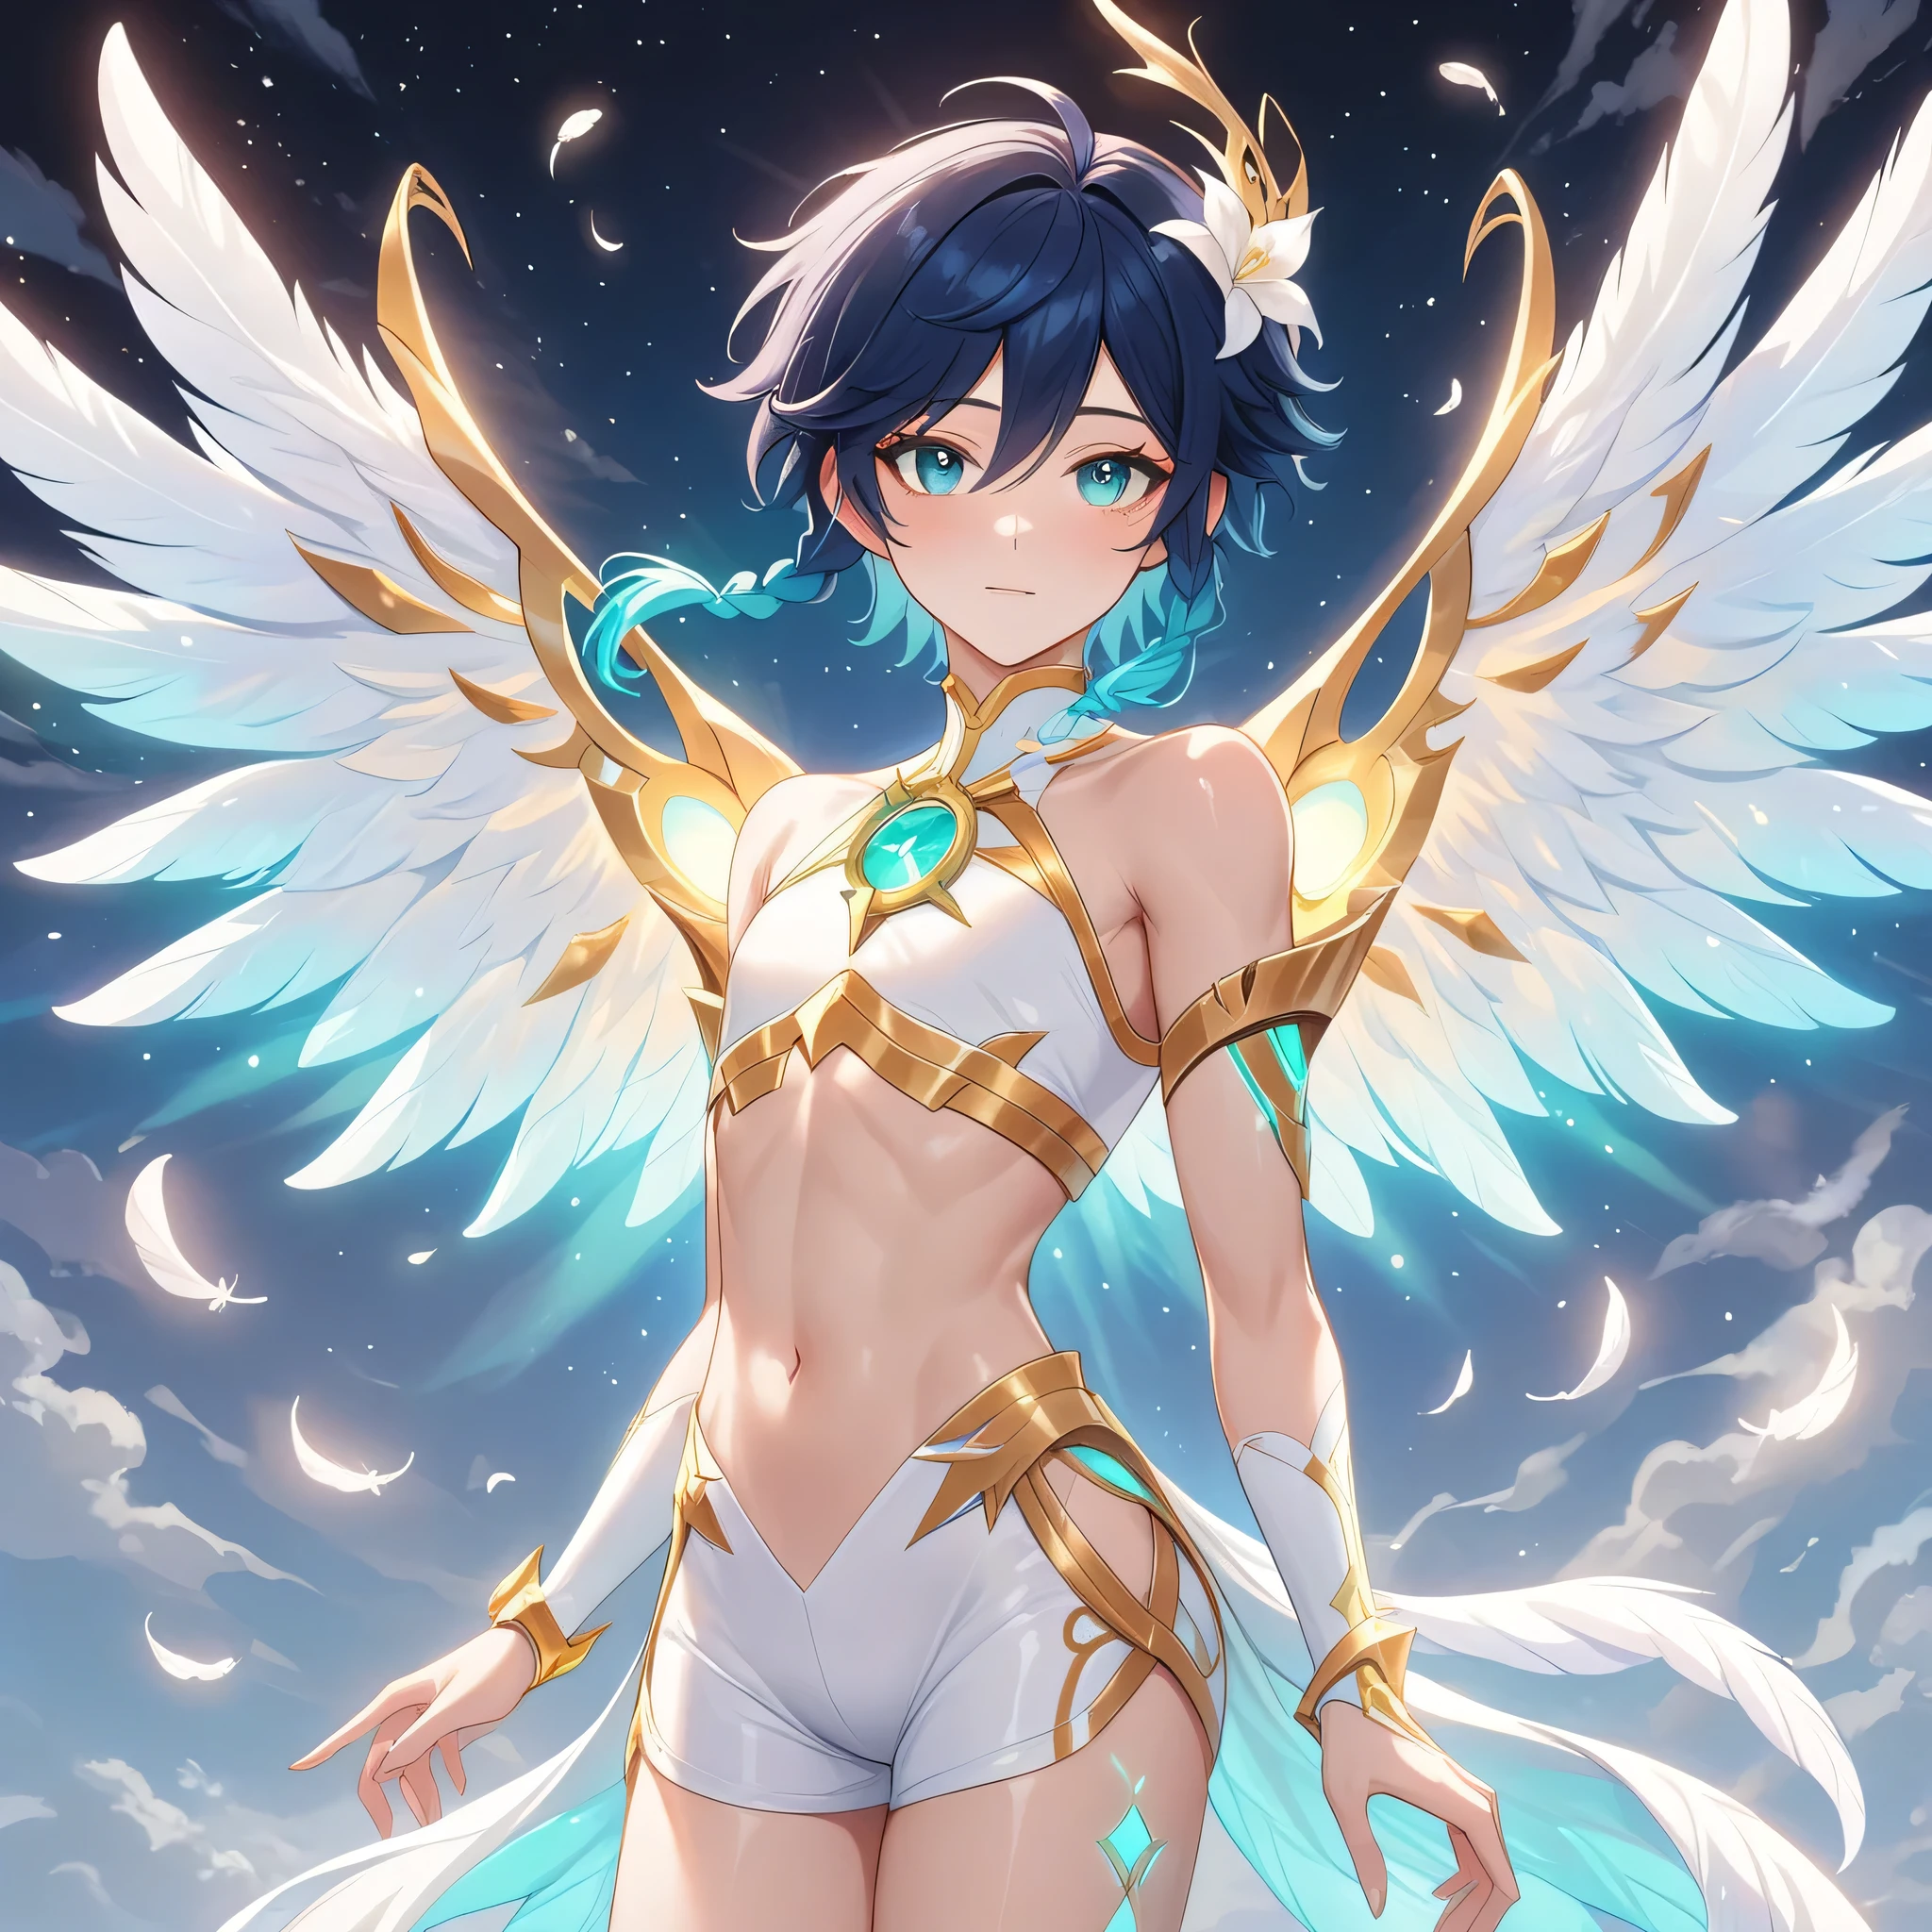 masterpiece,best quality,very aesthetic,absurdres,1boy,venti_/(archon/)_/(genshin_impact/),male_focus,detailed_eyes,teenage boy,large fluffy all white feathered_wings,white halter_crop top with gold accessories,smooth low waisted white spandex shorts with gold trim,single hair_flower,midriff,black blue hair gradient,twin braids,((flat chest)),starry_sky,moon,starry_sky_print,((bluegreen eyes)),slender,feathers,divine,detailed_eyes,narrow_waist,bare stomach,iridescent volumetric light, god rays, heavenly,cosmic,celestial,8k,4k,uhd,award-winning,realistic:.25